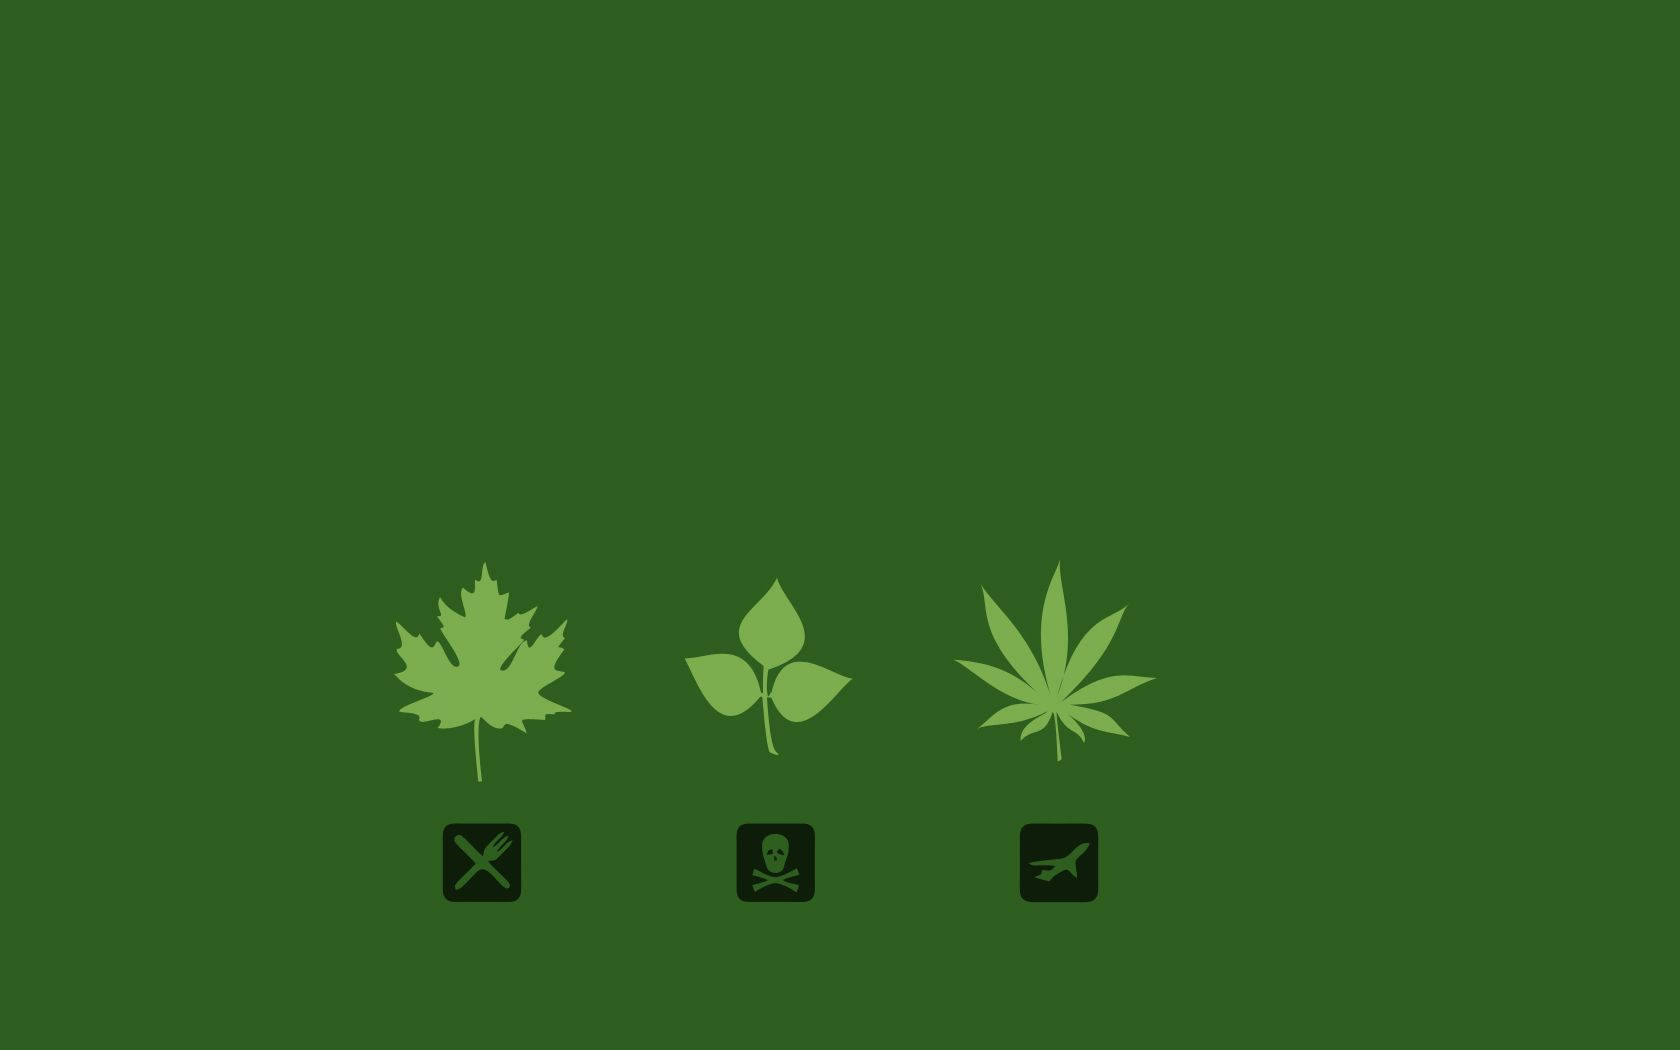 Cool Weed Icons Wallpaper